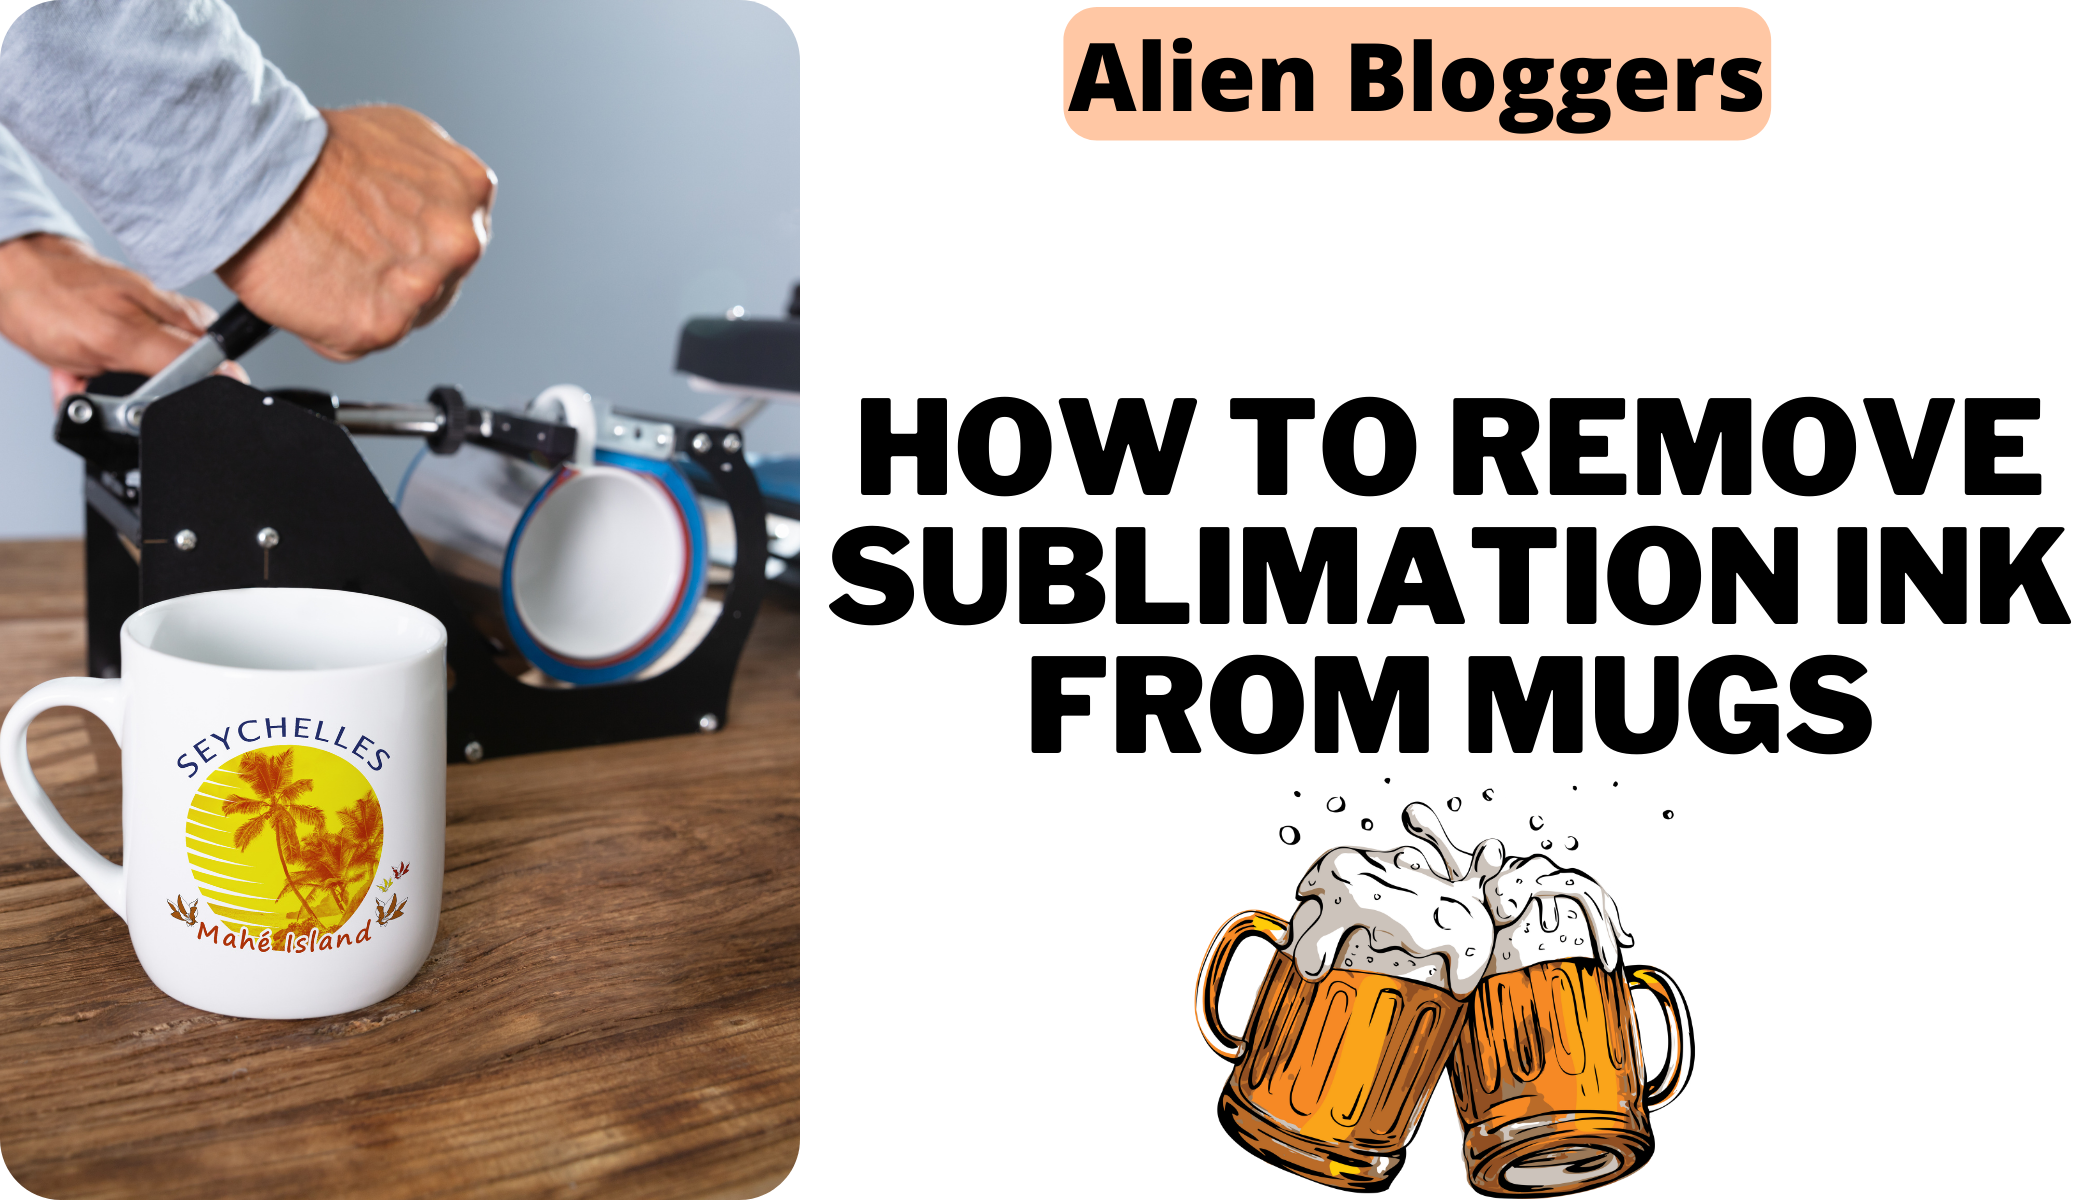 How to Remove Sublimation Ink From Mugs